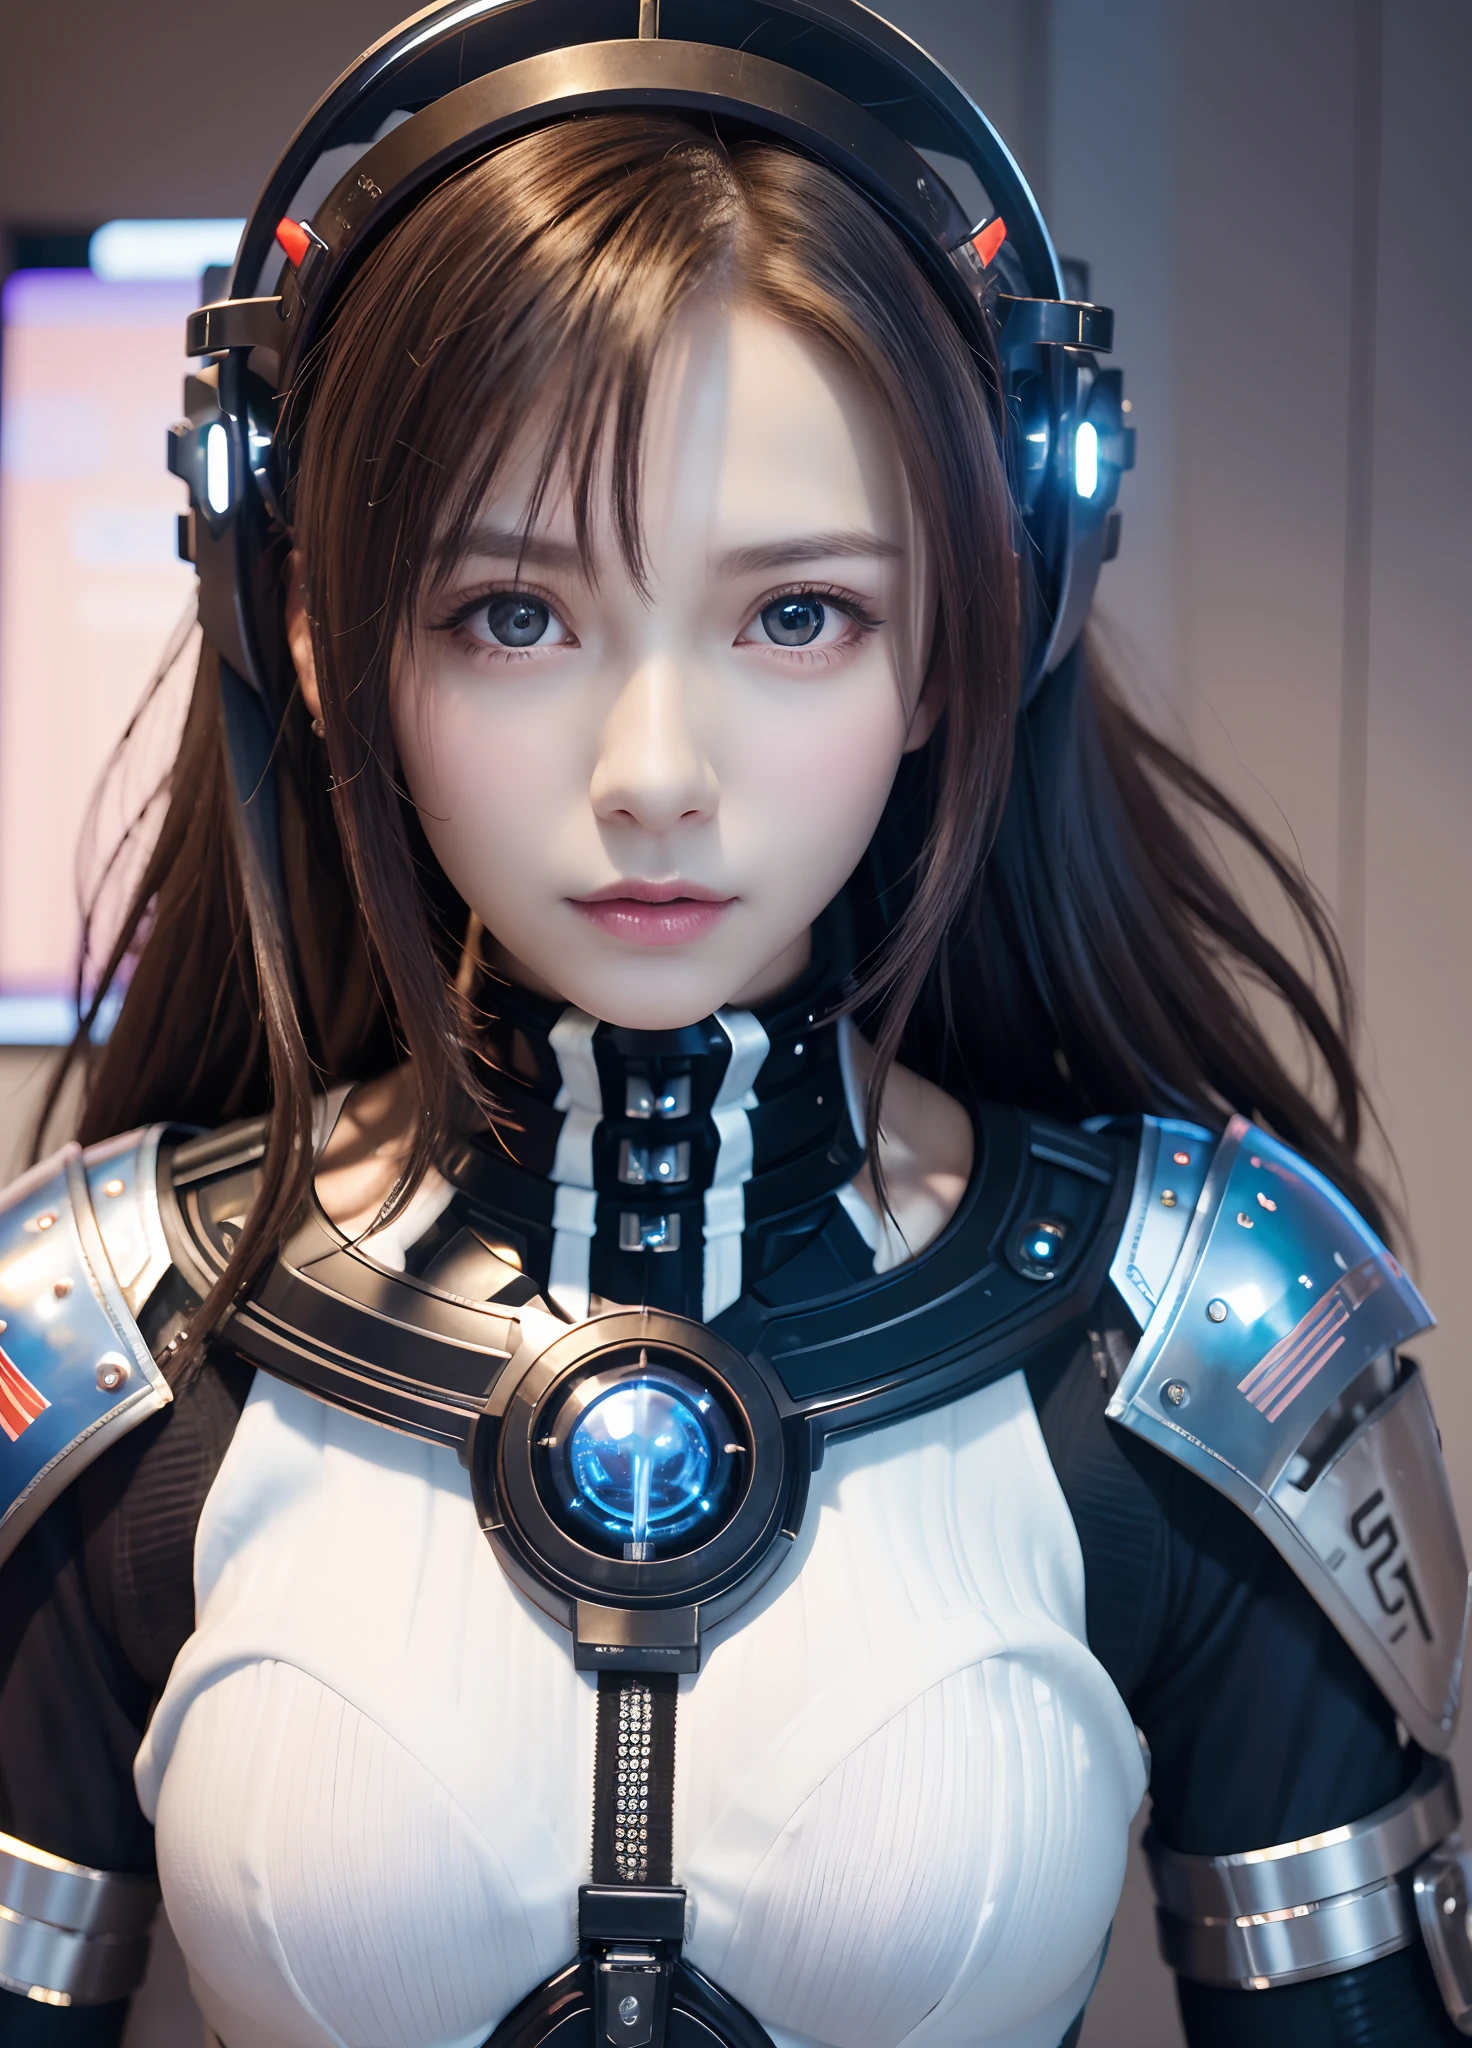 Woman in futuristic costume with futuristic helmet and futuristic sword, Trending on CGSTATION, trending at cgstation, portrait knights of zodiac girl, Cute cyborg girl, perfect android girl, portrait anime space cadet girl, beautiful girl cyborg, Girl in Mecha Cyber Armor, Game CG, cgsociety and fenghua zhong, beautiful cyborg priestess